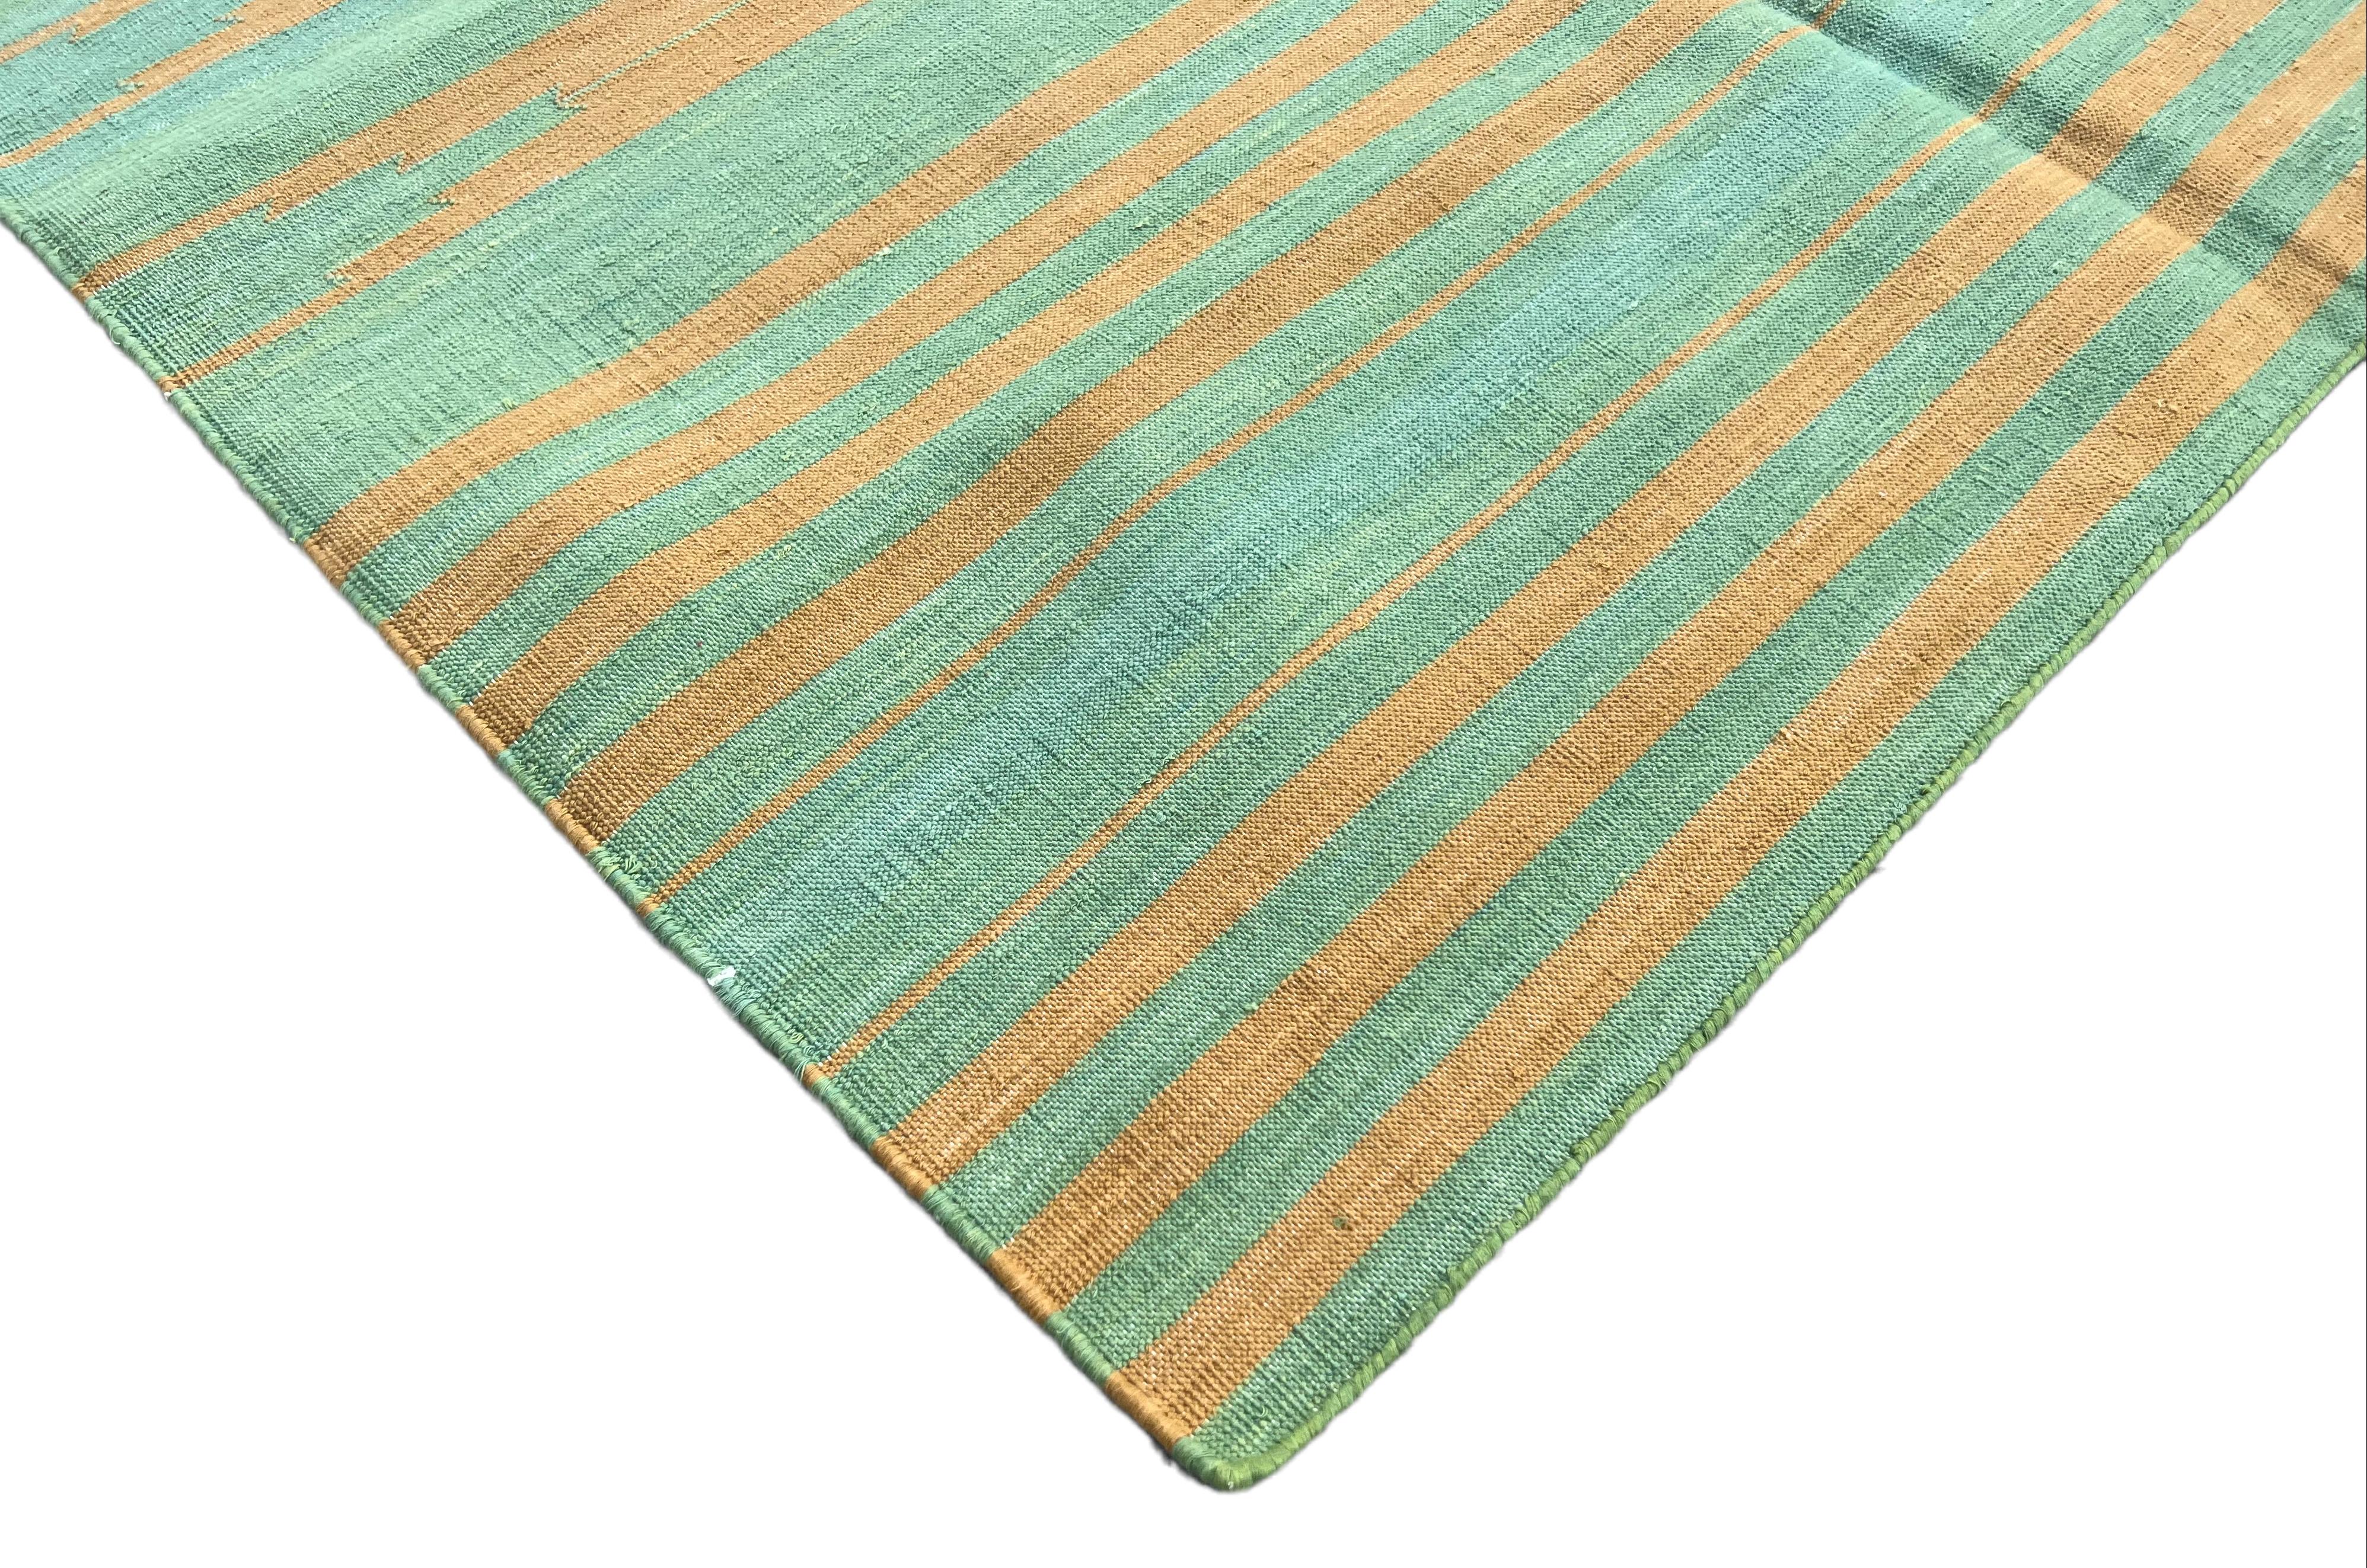 Cotton Vegetable Dyed Green and Mustard Striped Indian Dhurrie Rug-5'x8' 

These special flat-weave dhurries are hand-woven with 15 ply 100% cotton yarn. Due to the special manufacturing techniques used to create our rugs, the size and color of each